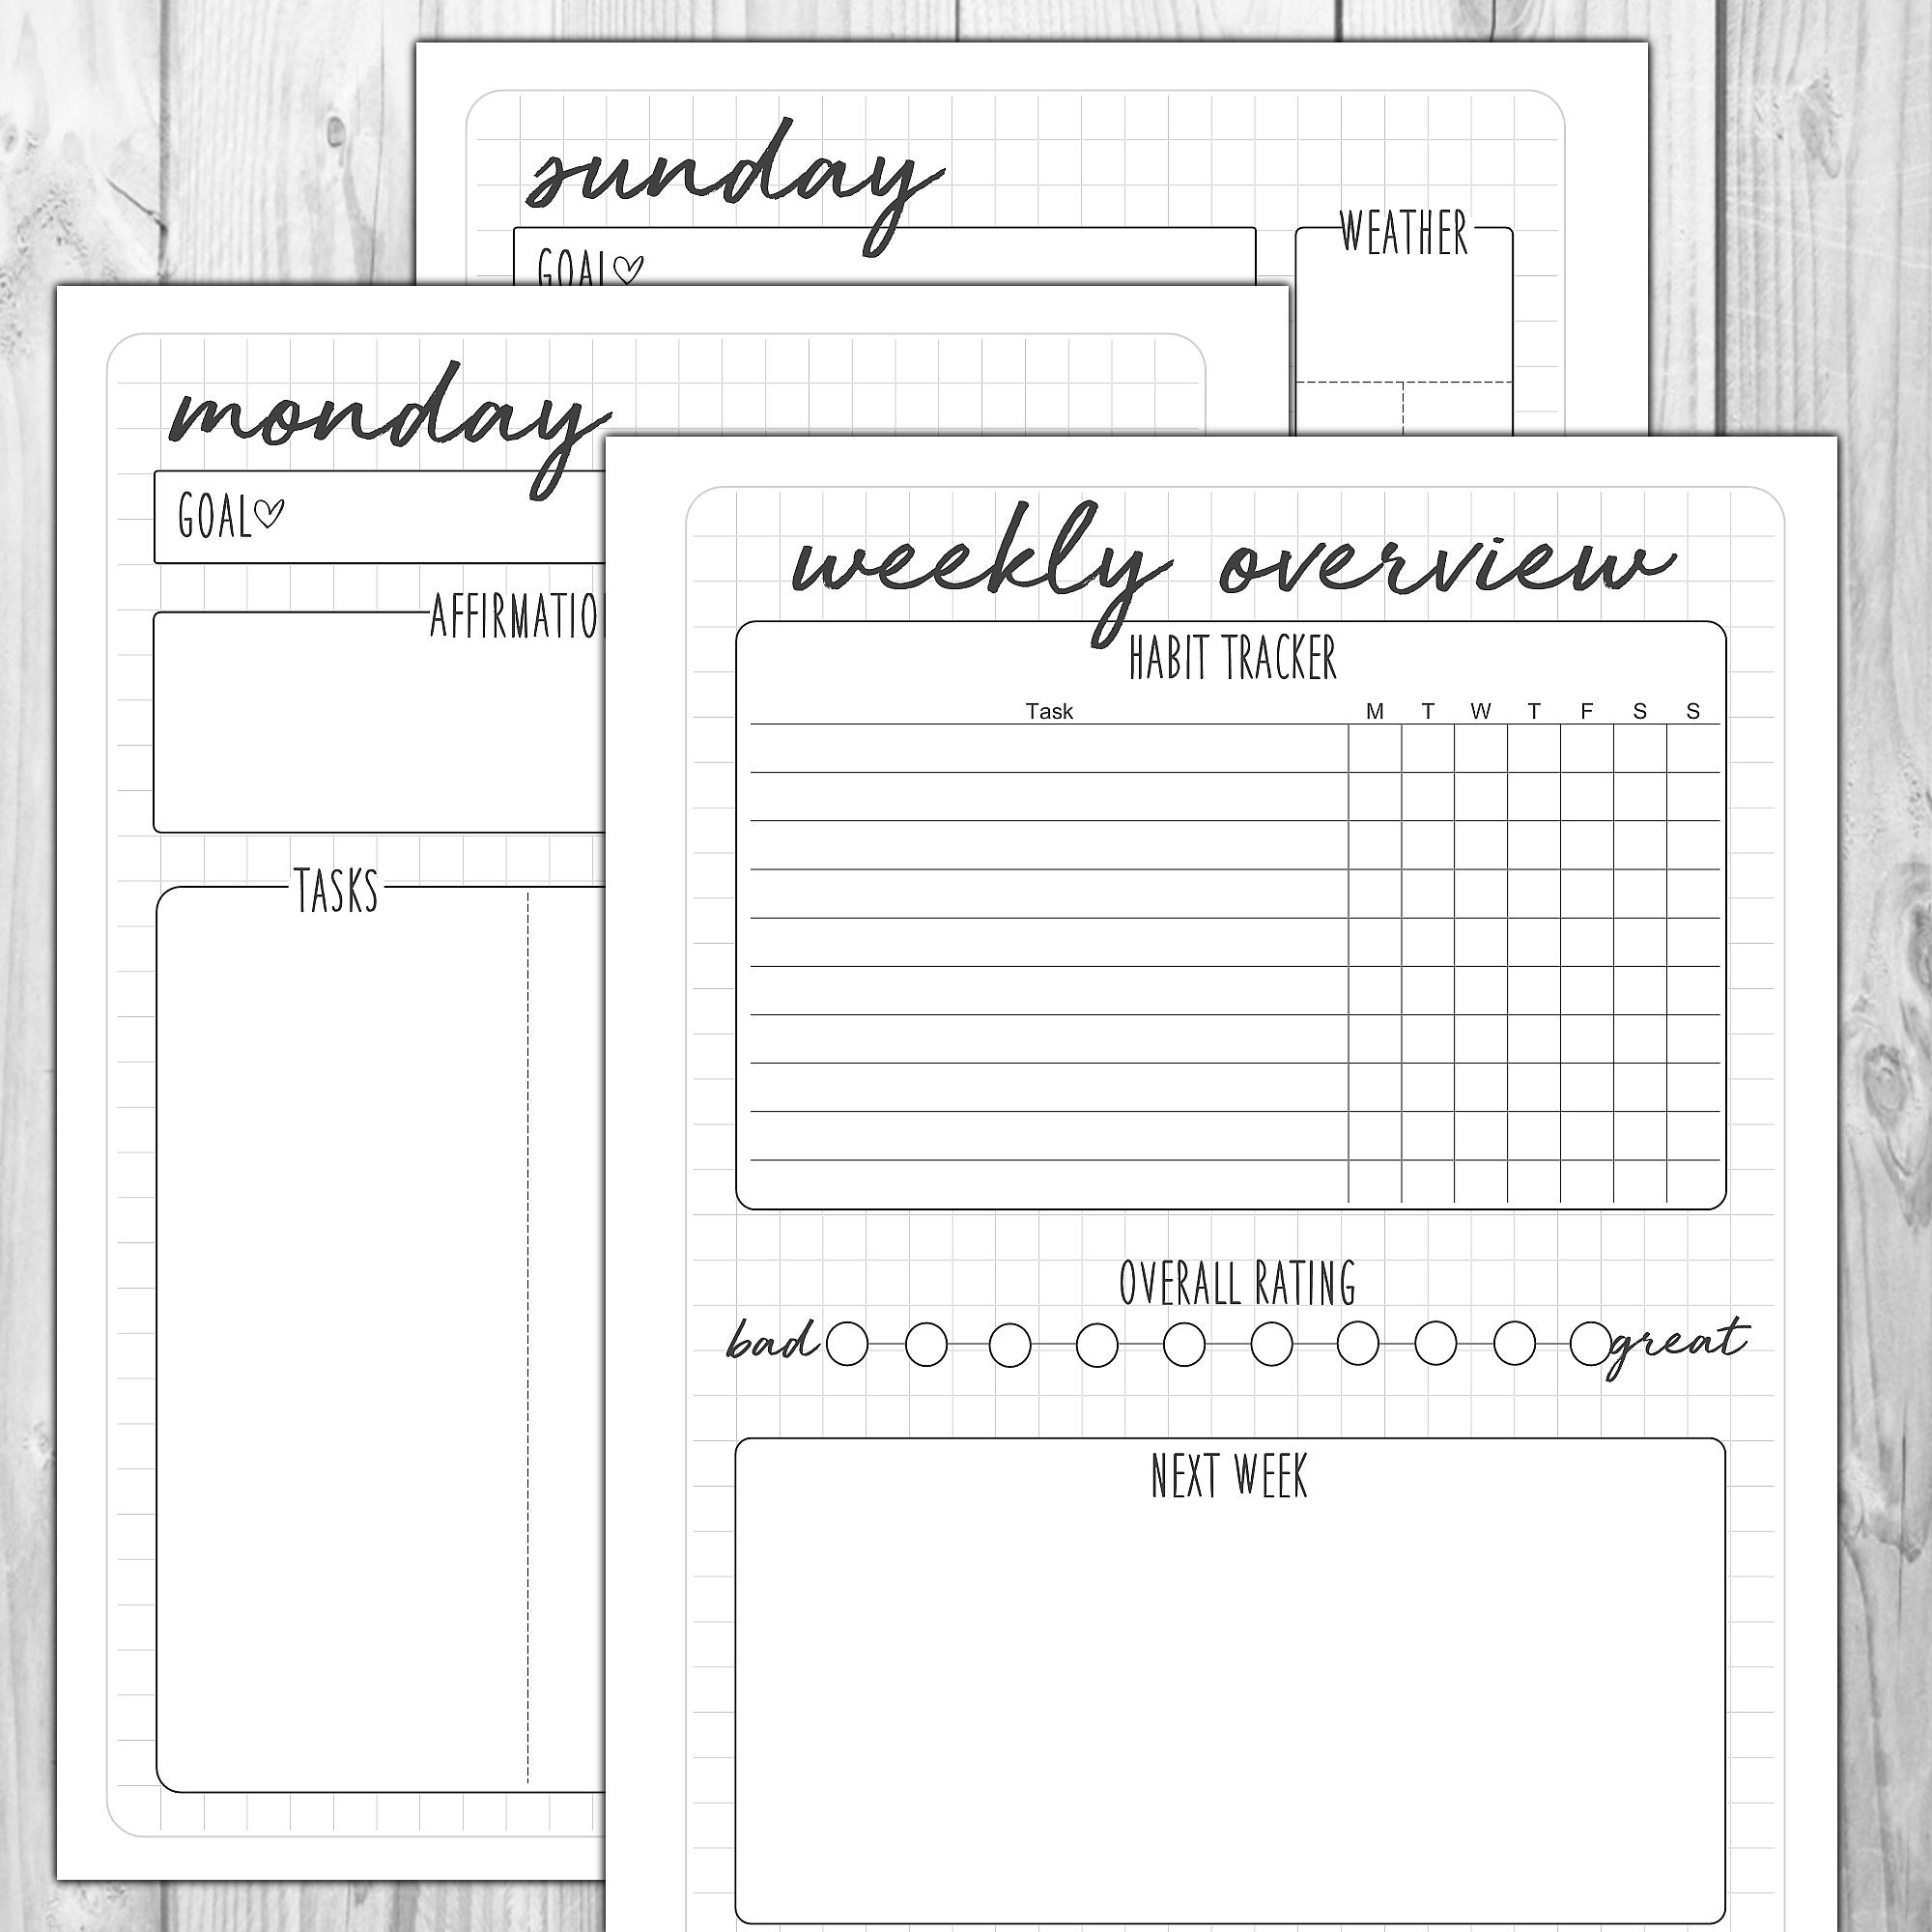 Daily Planner Printable Undated Multiple Printable Sizes | Etsy